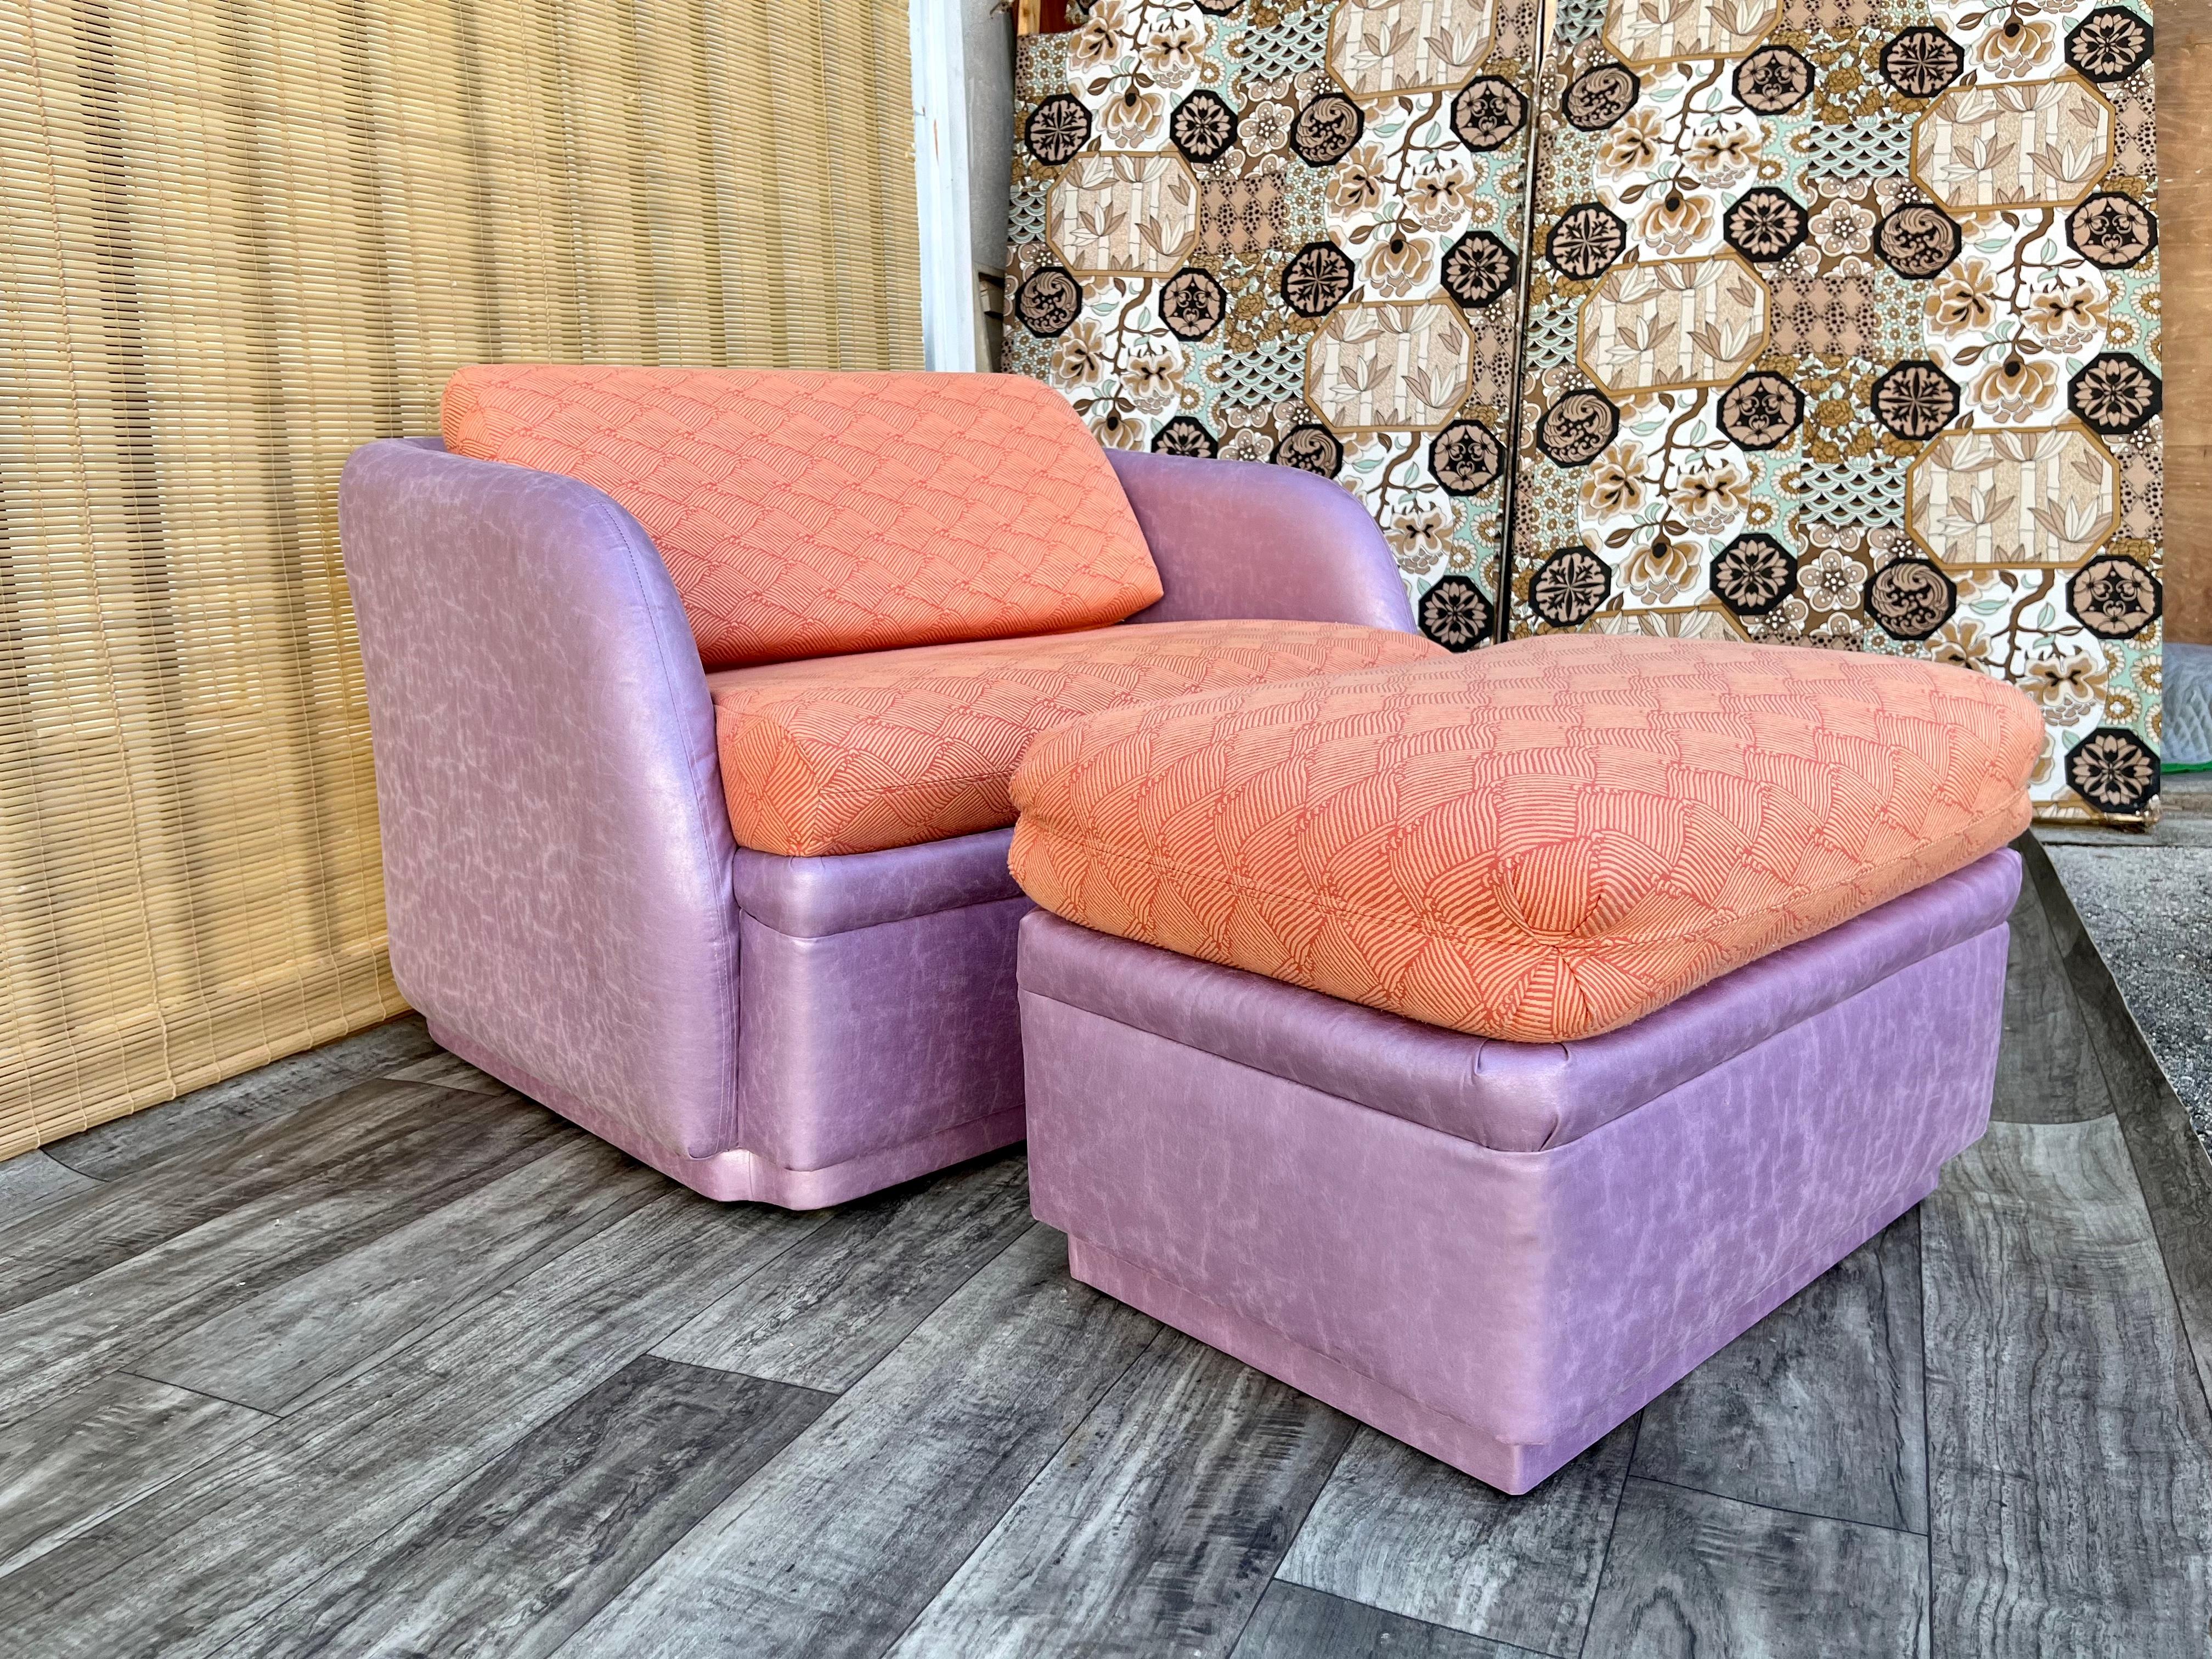 Vintage Postmodern Sleeper Lounge Chair and Ottoman by Thayer Coggin Institutional. Circa 1980s
The Lounge chair features a pull out bed and light purple micro suede like upholstery with a contrasting textured Burt orange removable cushions. 
The